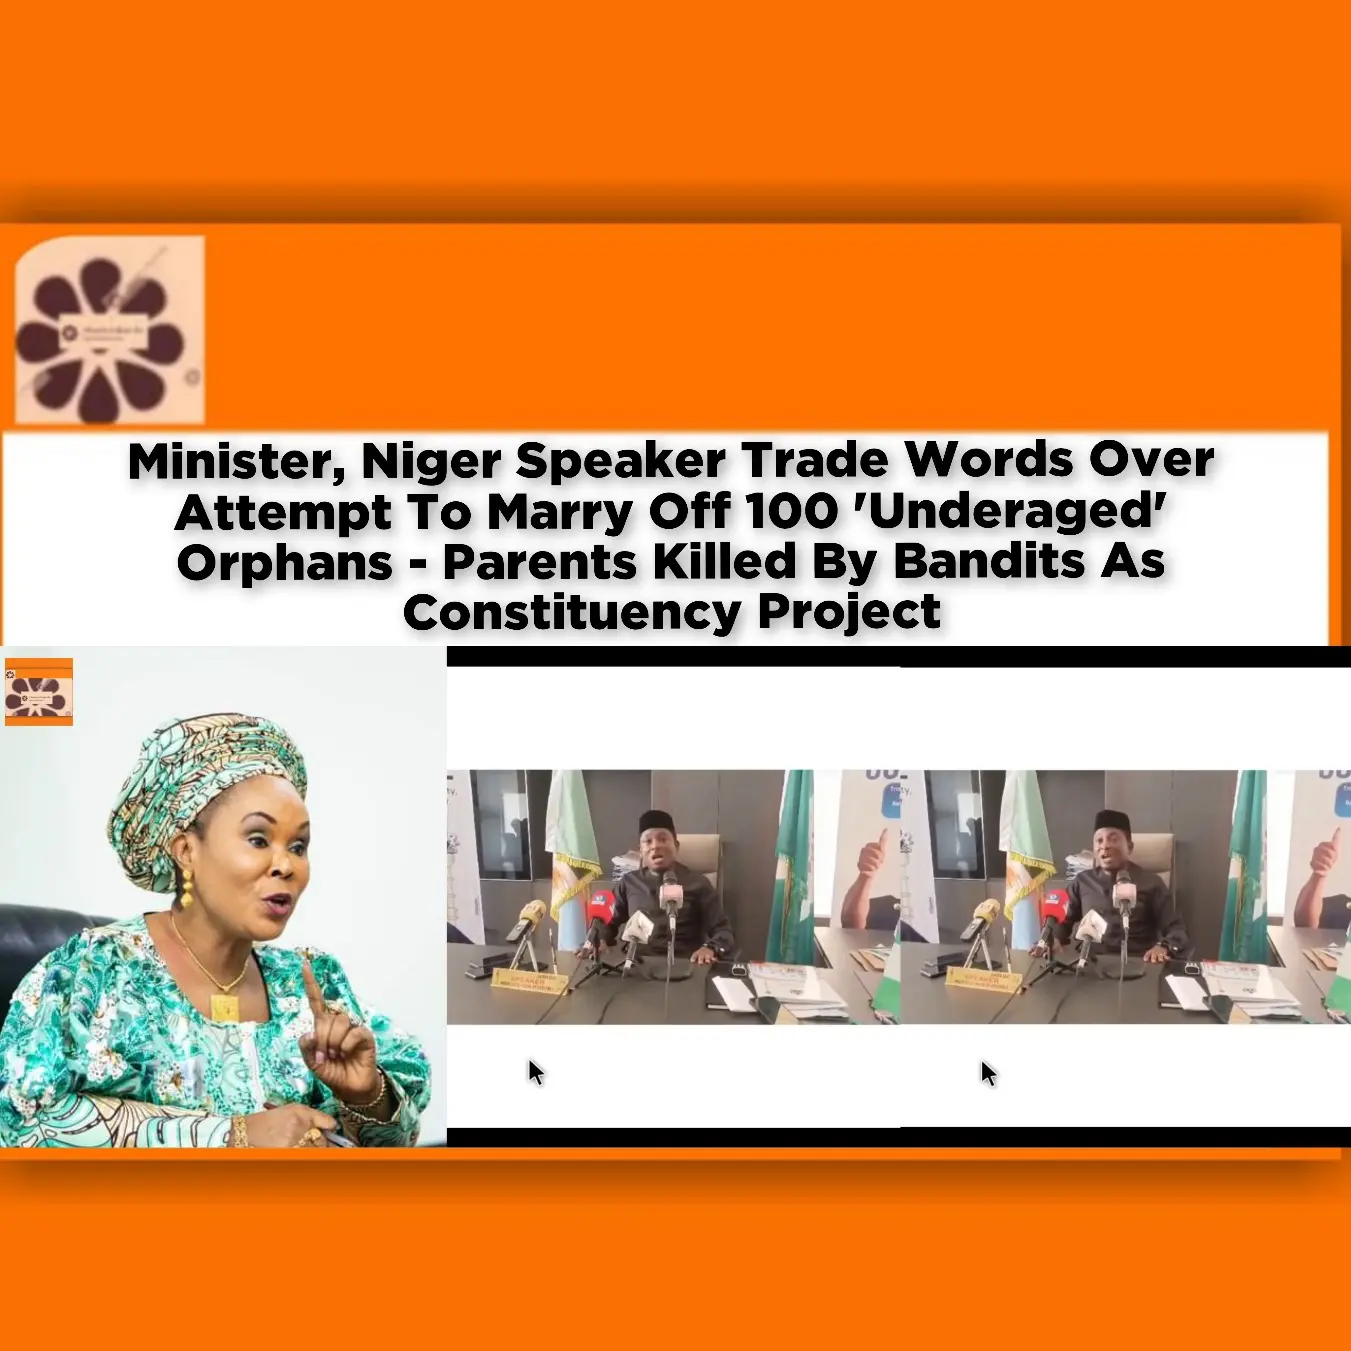 Minister, Niger Speaker Trade Words Over Attempt To Marry Off 100 'Underaged' Orphans - Parents Killed By Bandits As Constituency Project ~ OsazuwaAkonedo #FaniKayode